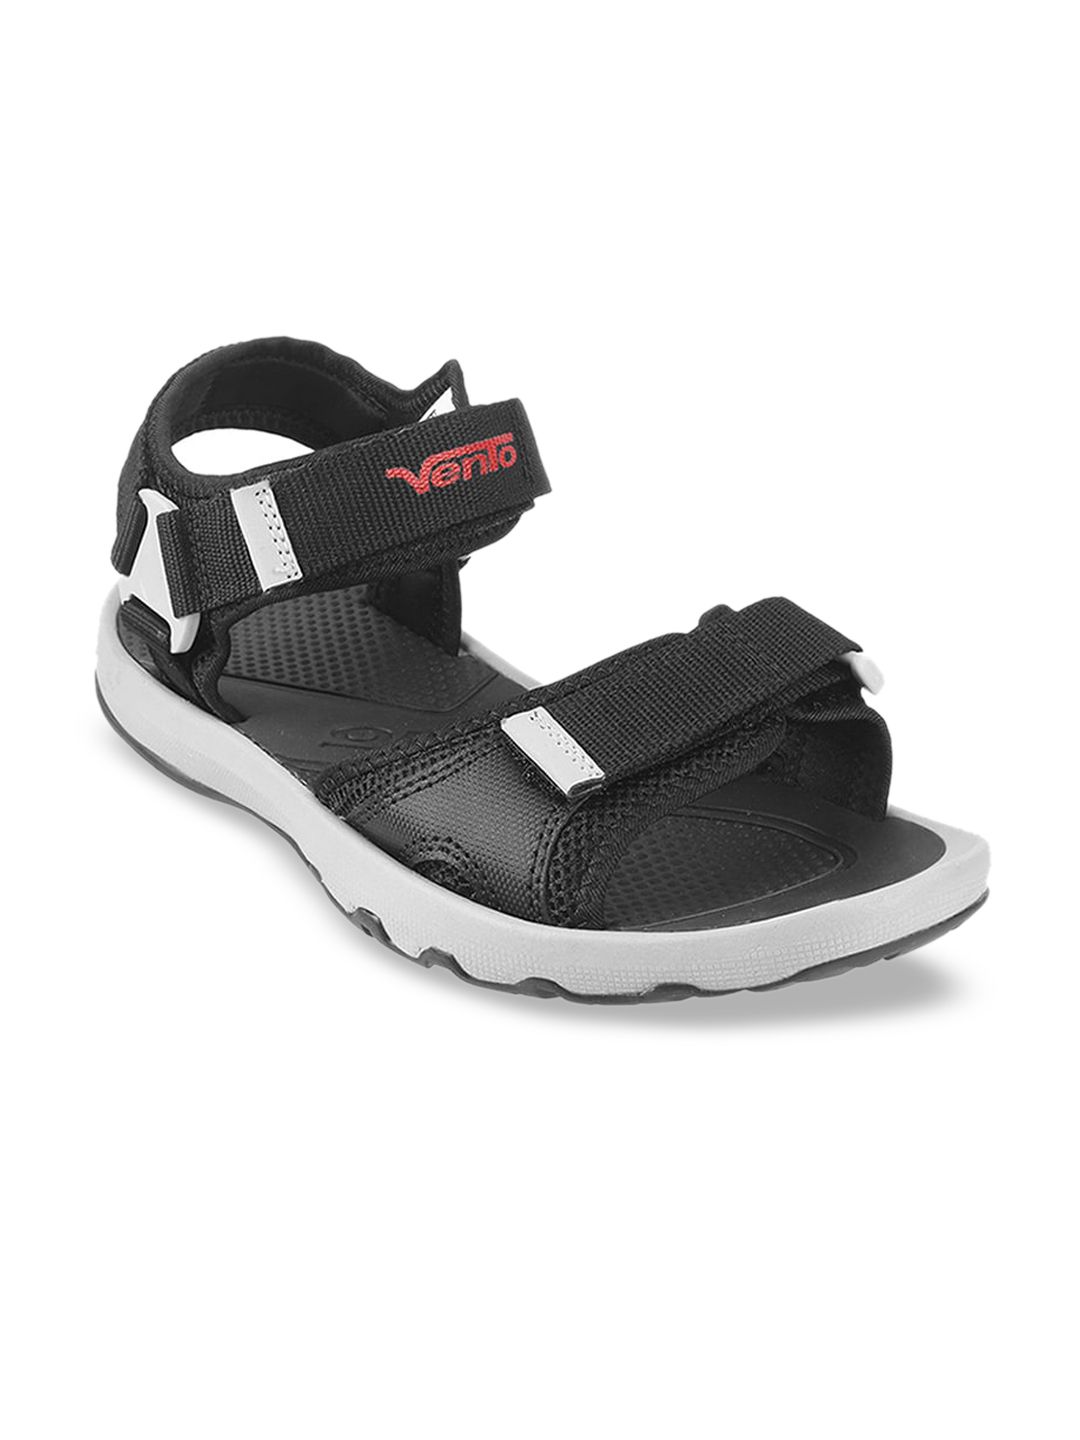 Vento Black Textured Sports Sandals Price in India